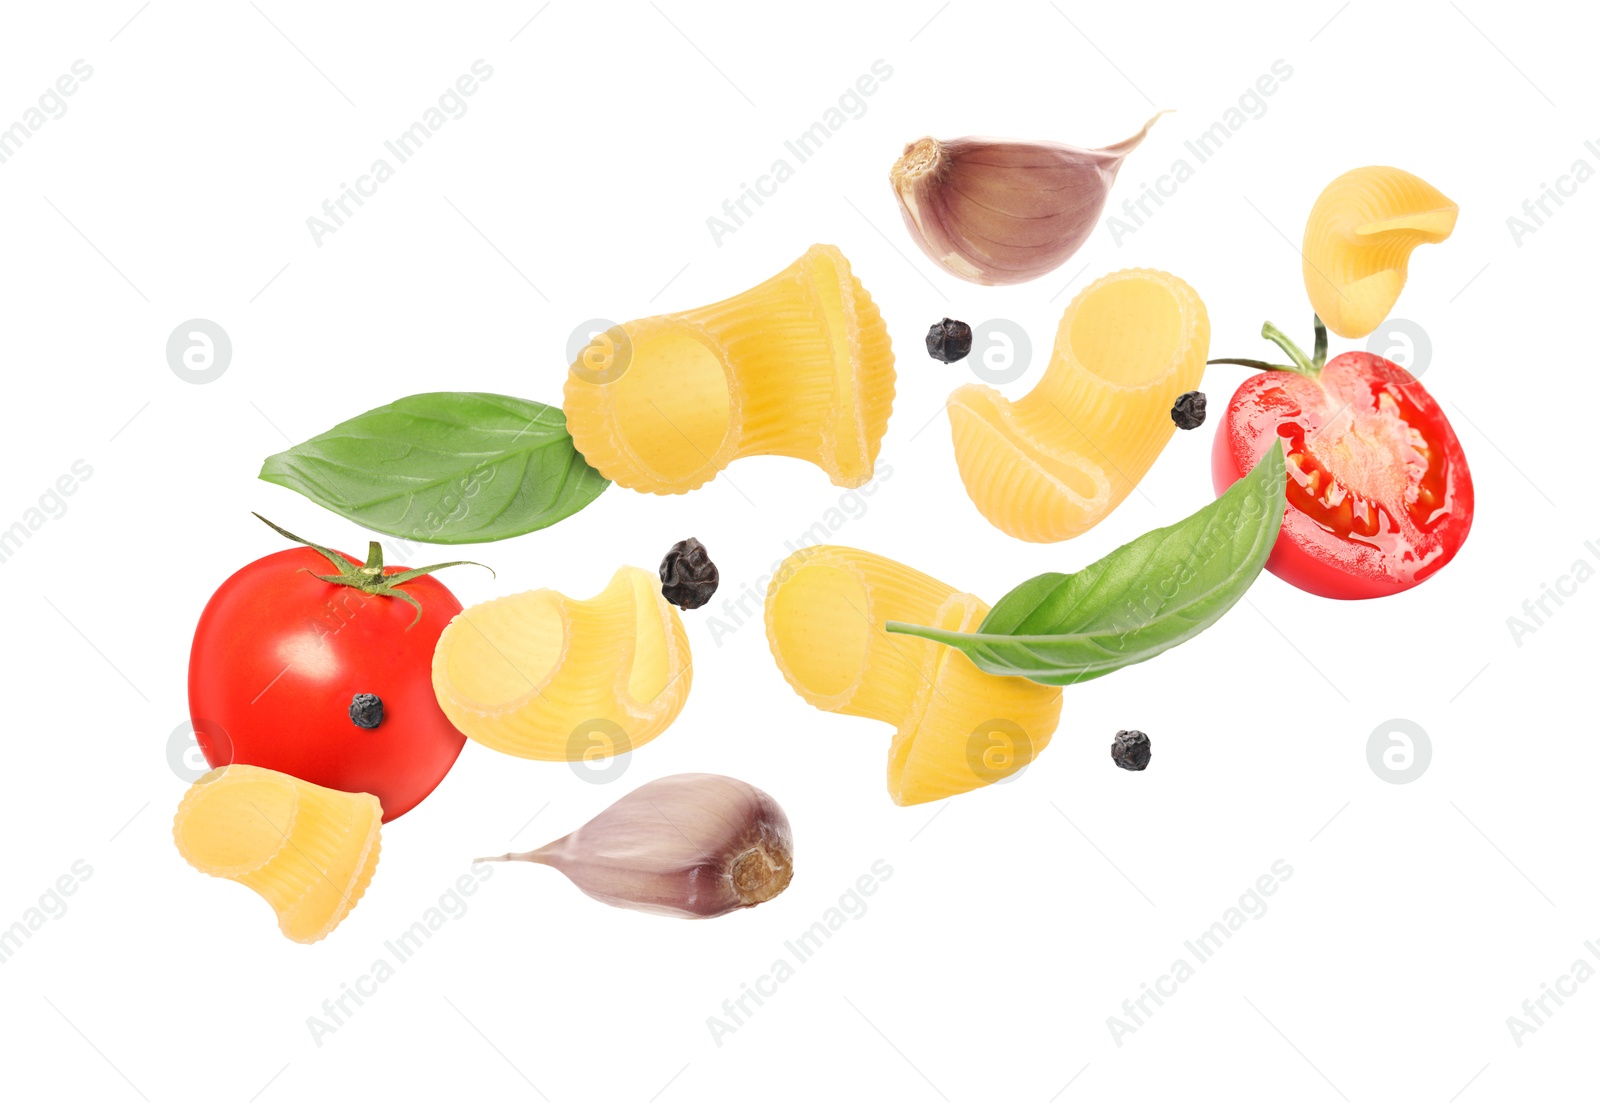 Image of Raw pasta, tomatoes, garlic and basil in air on white background